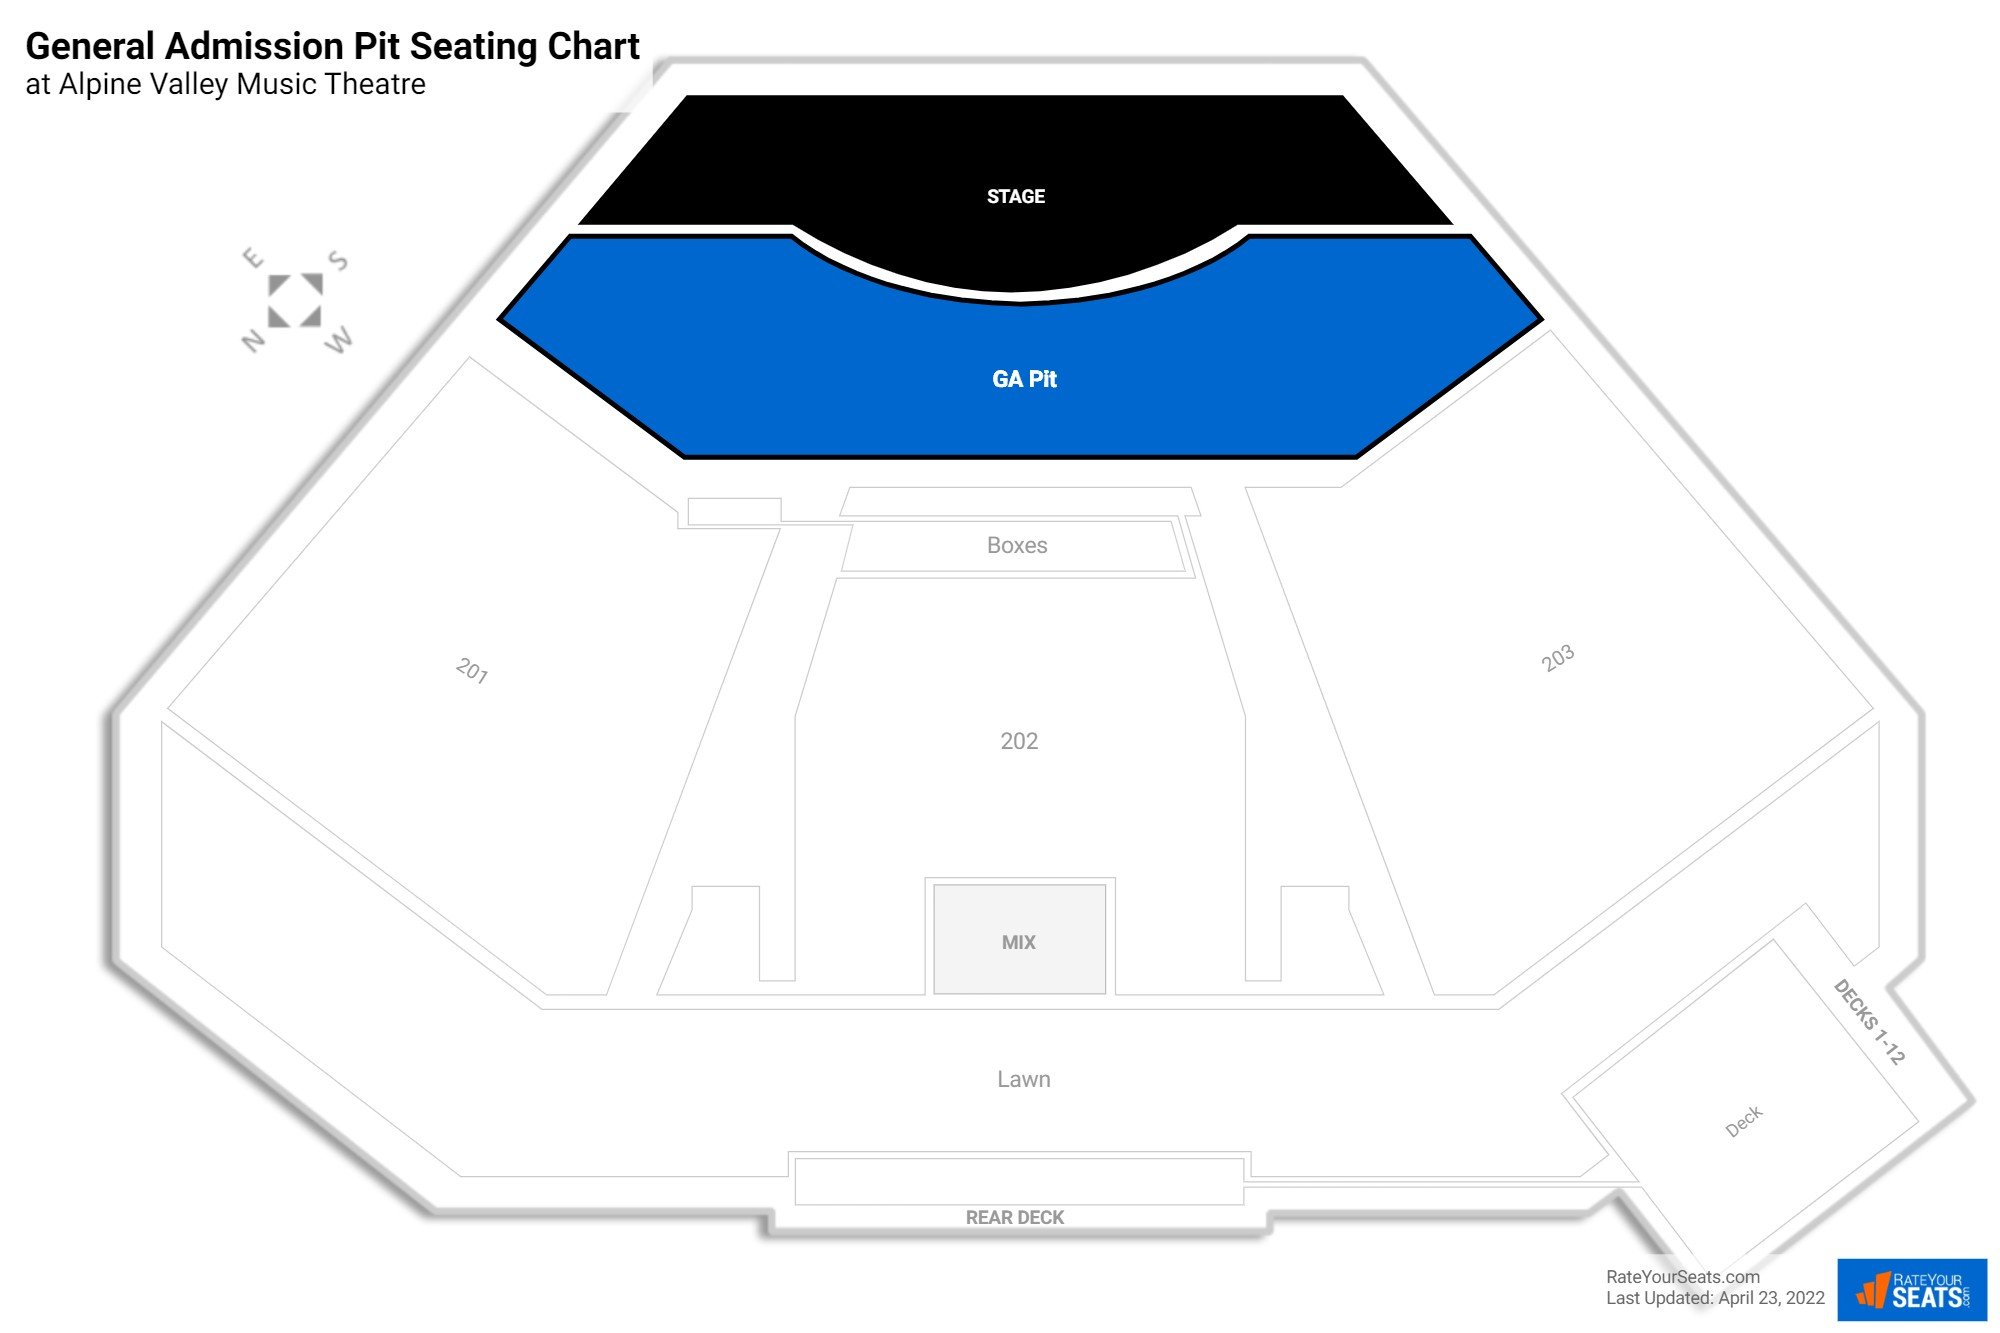 Concert General Admission Pit Seating Chart at Alpine Valley Music Theatre